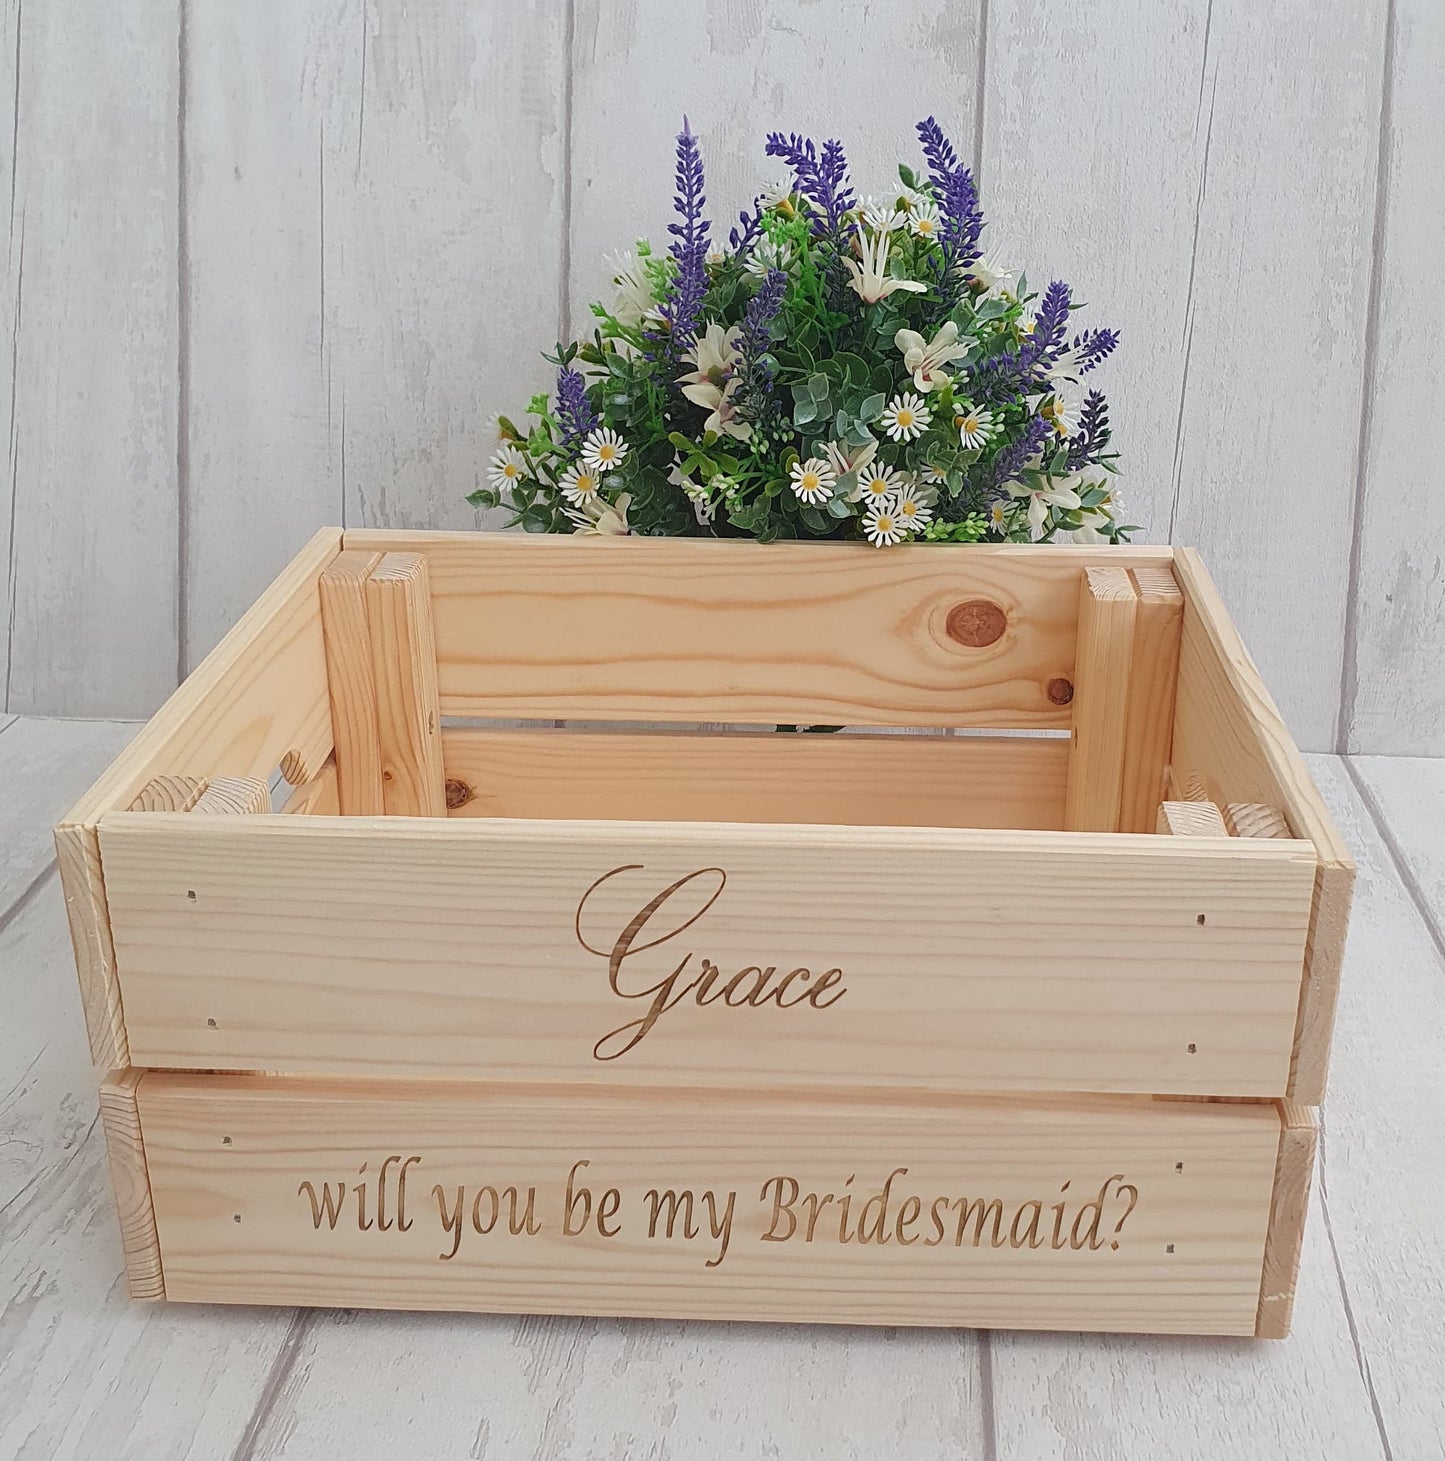 Personalised "will you be my Bridesmaid?" crate - LaserGiftsuk